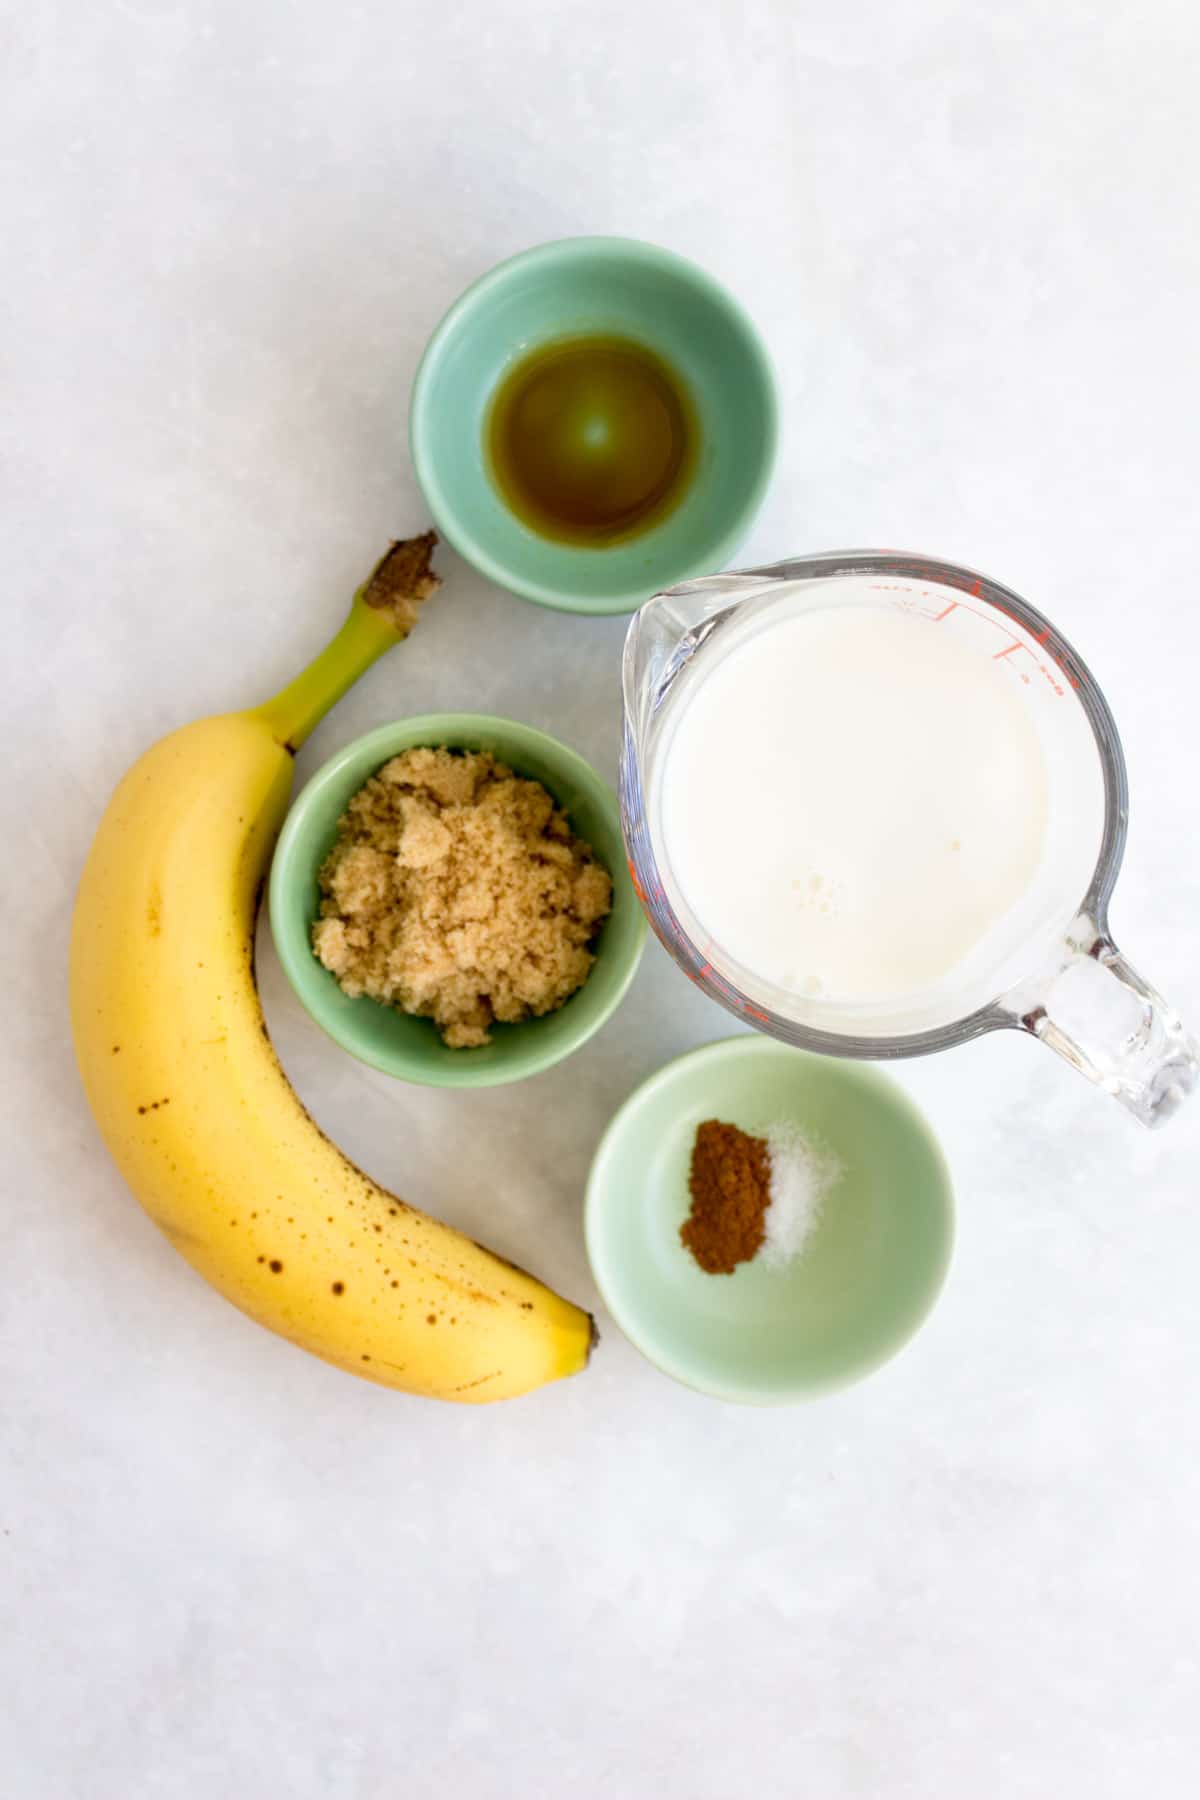 Ingredients for roasted banana milk with cinnamon.